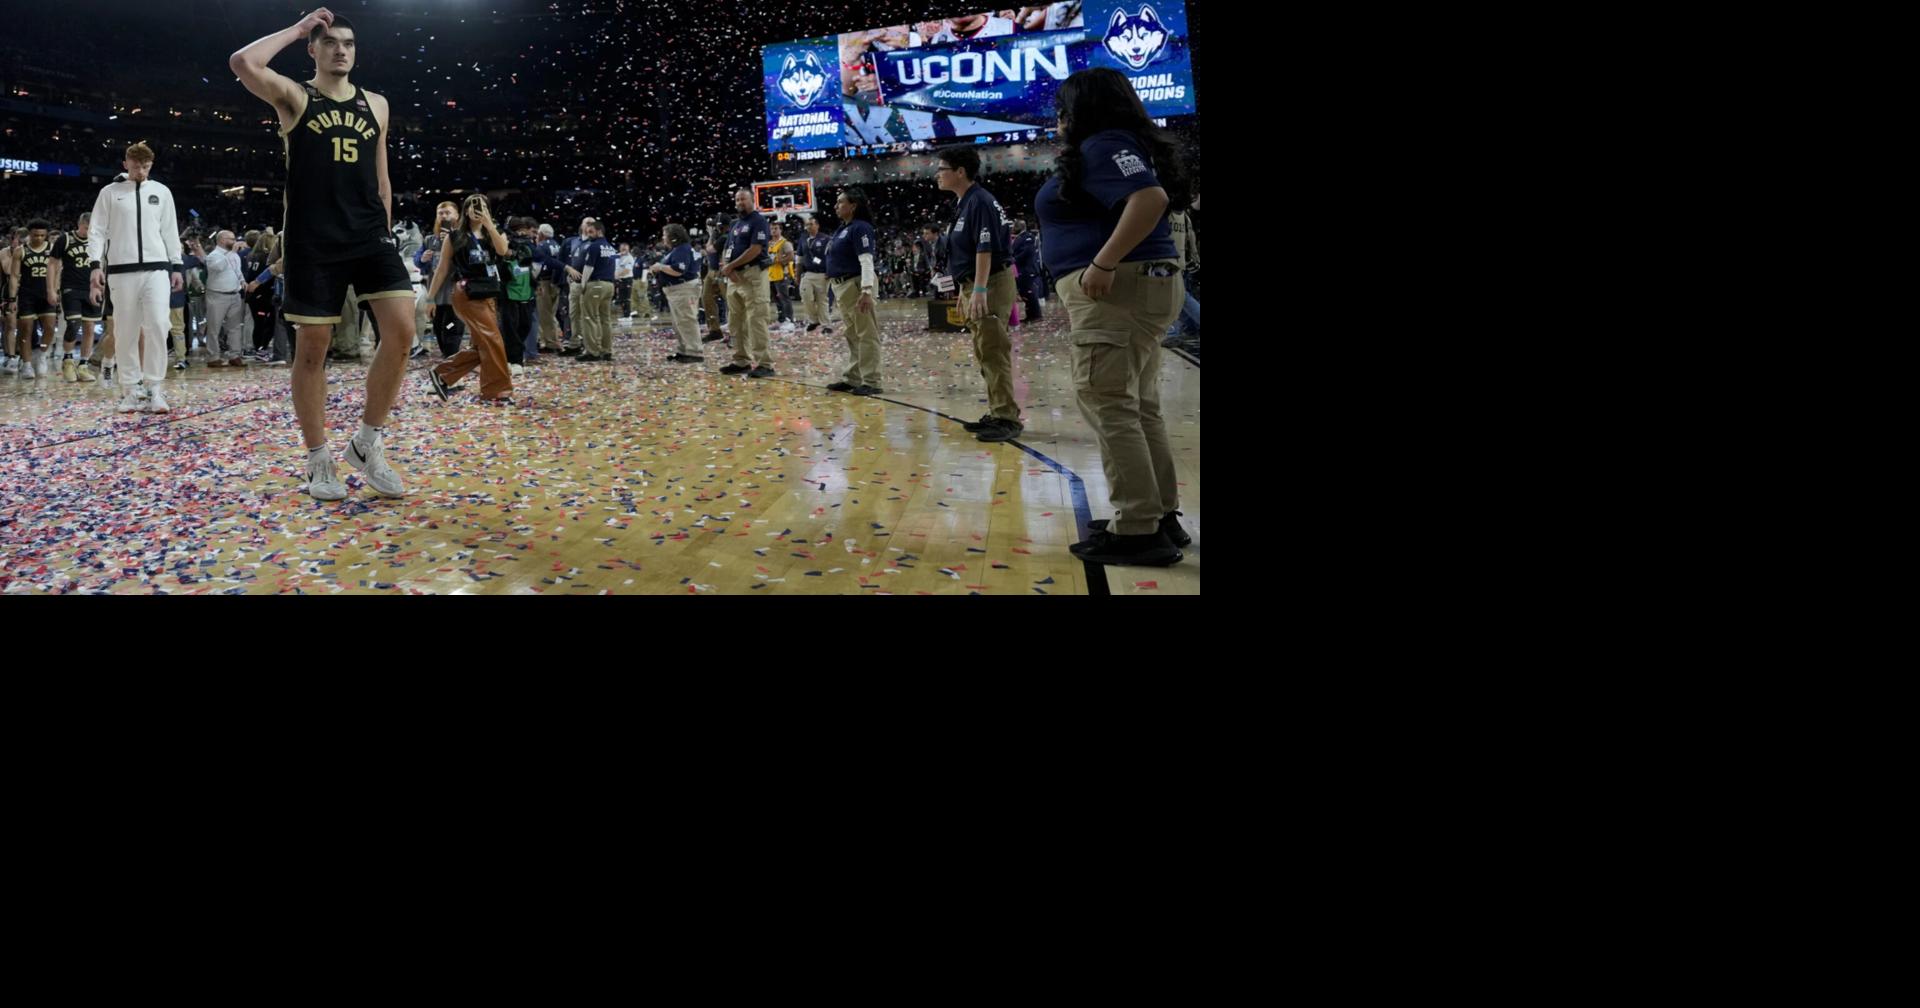 Purdue’s Zach Edey Displayed Exceptional Performance in the NCAA Title Game, But UConn Emerged Victorious